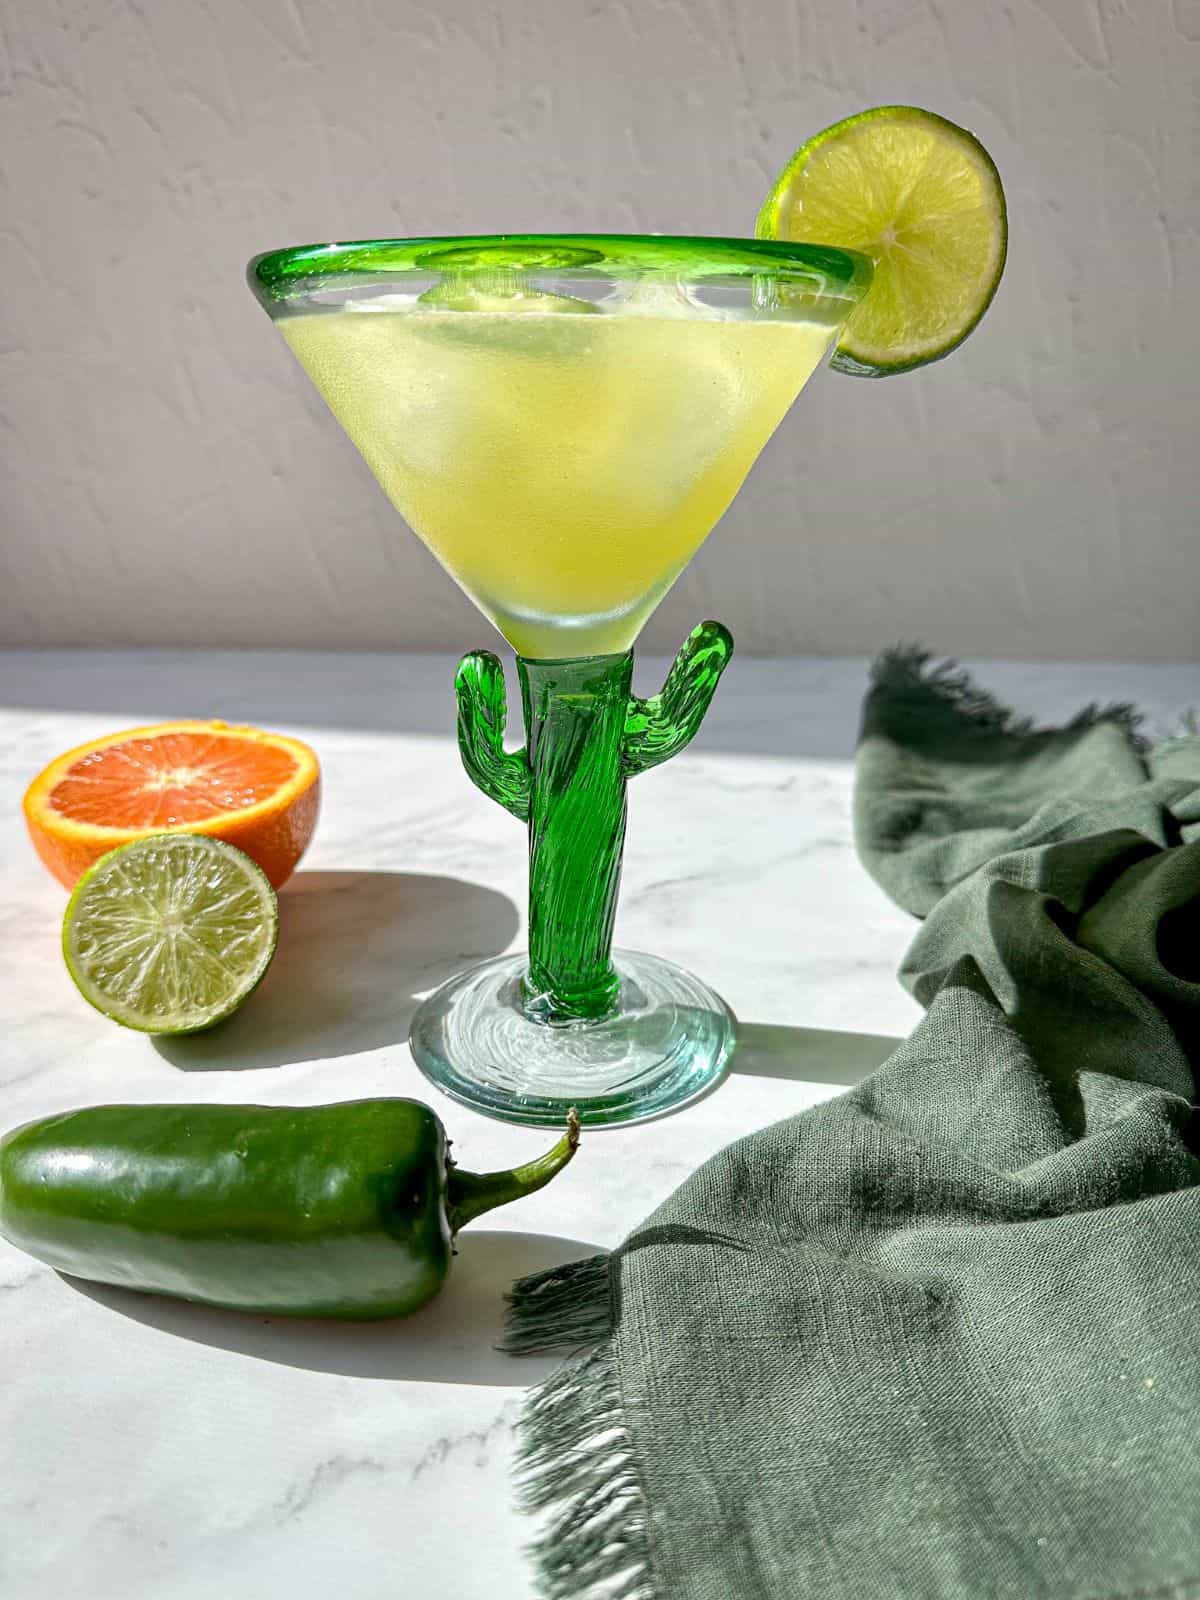 A skinny margarita garnished with a lime wedge in a green cactus shaped glass.